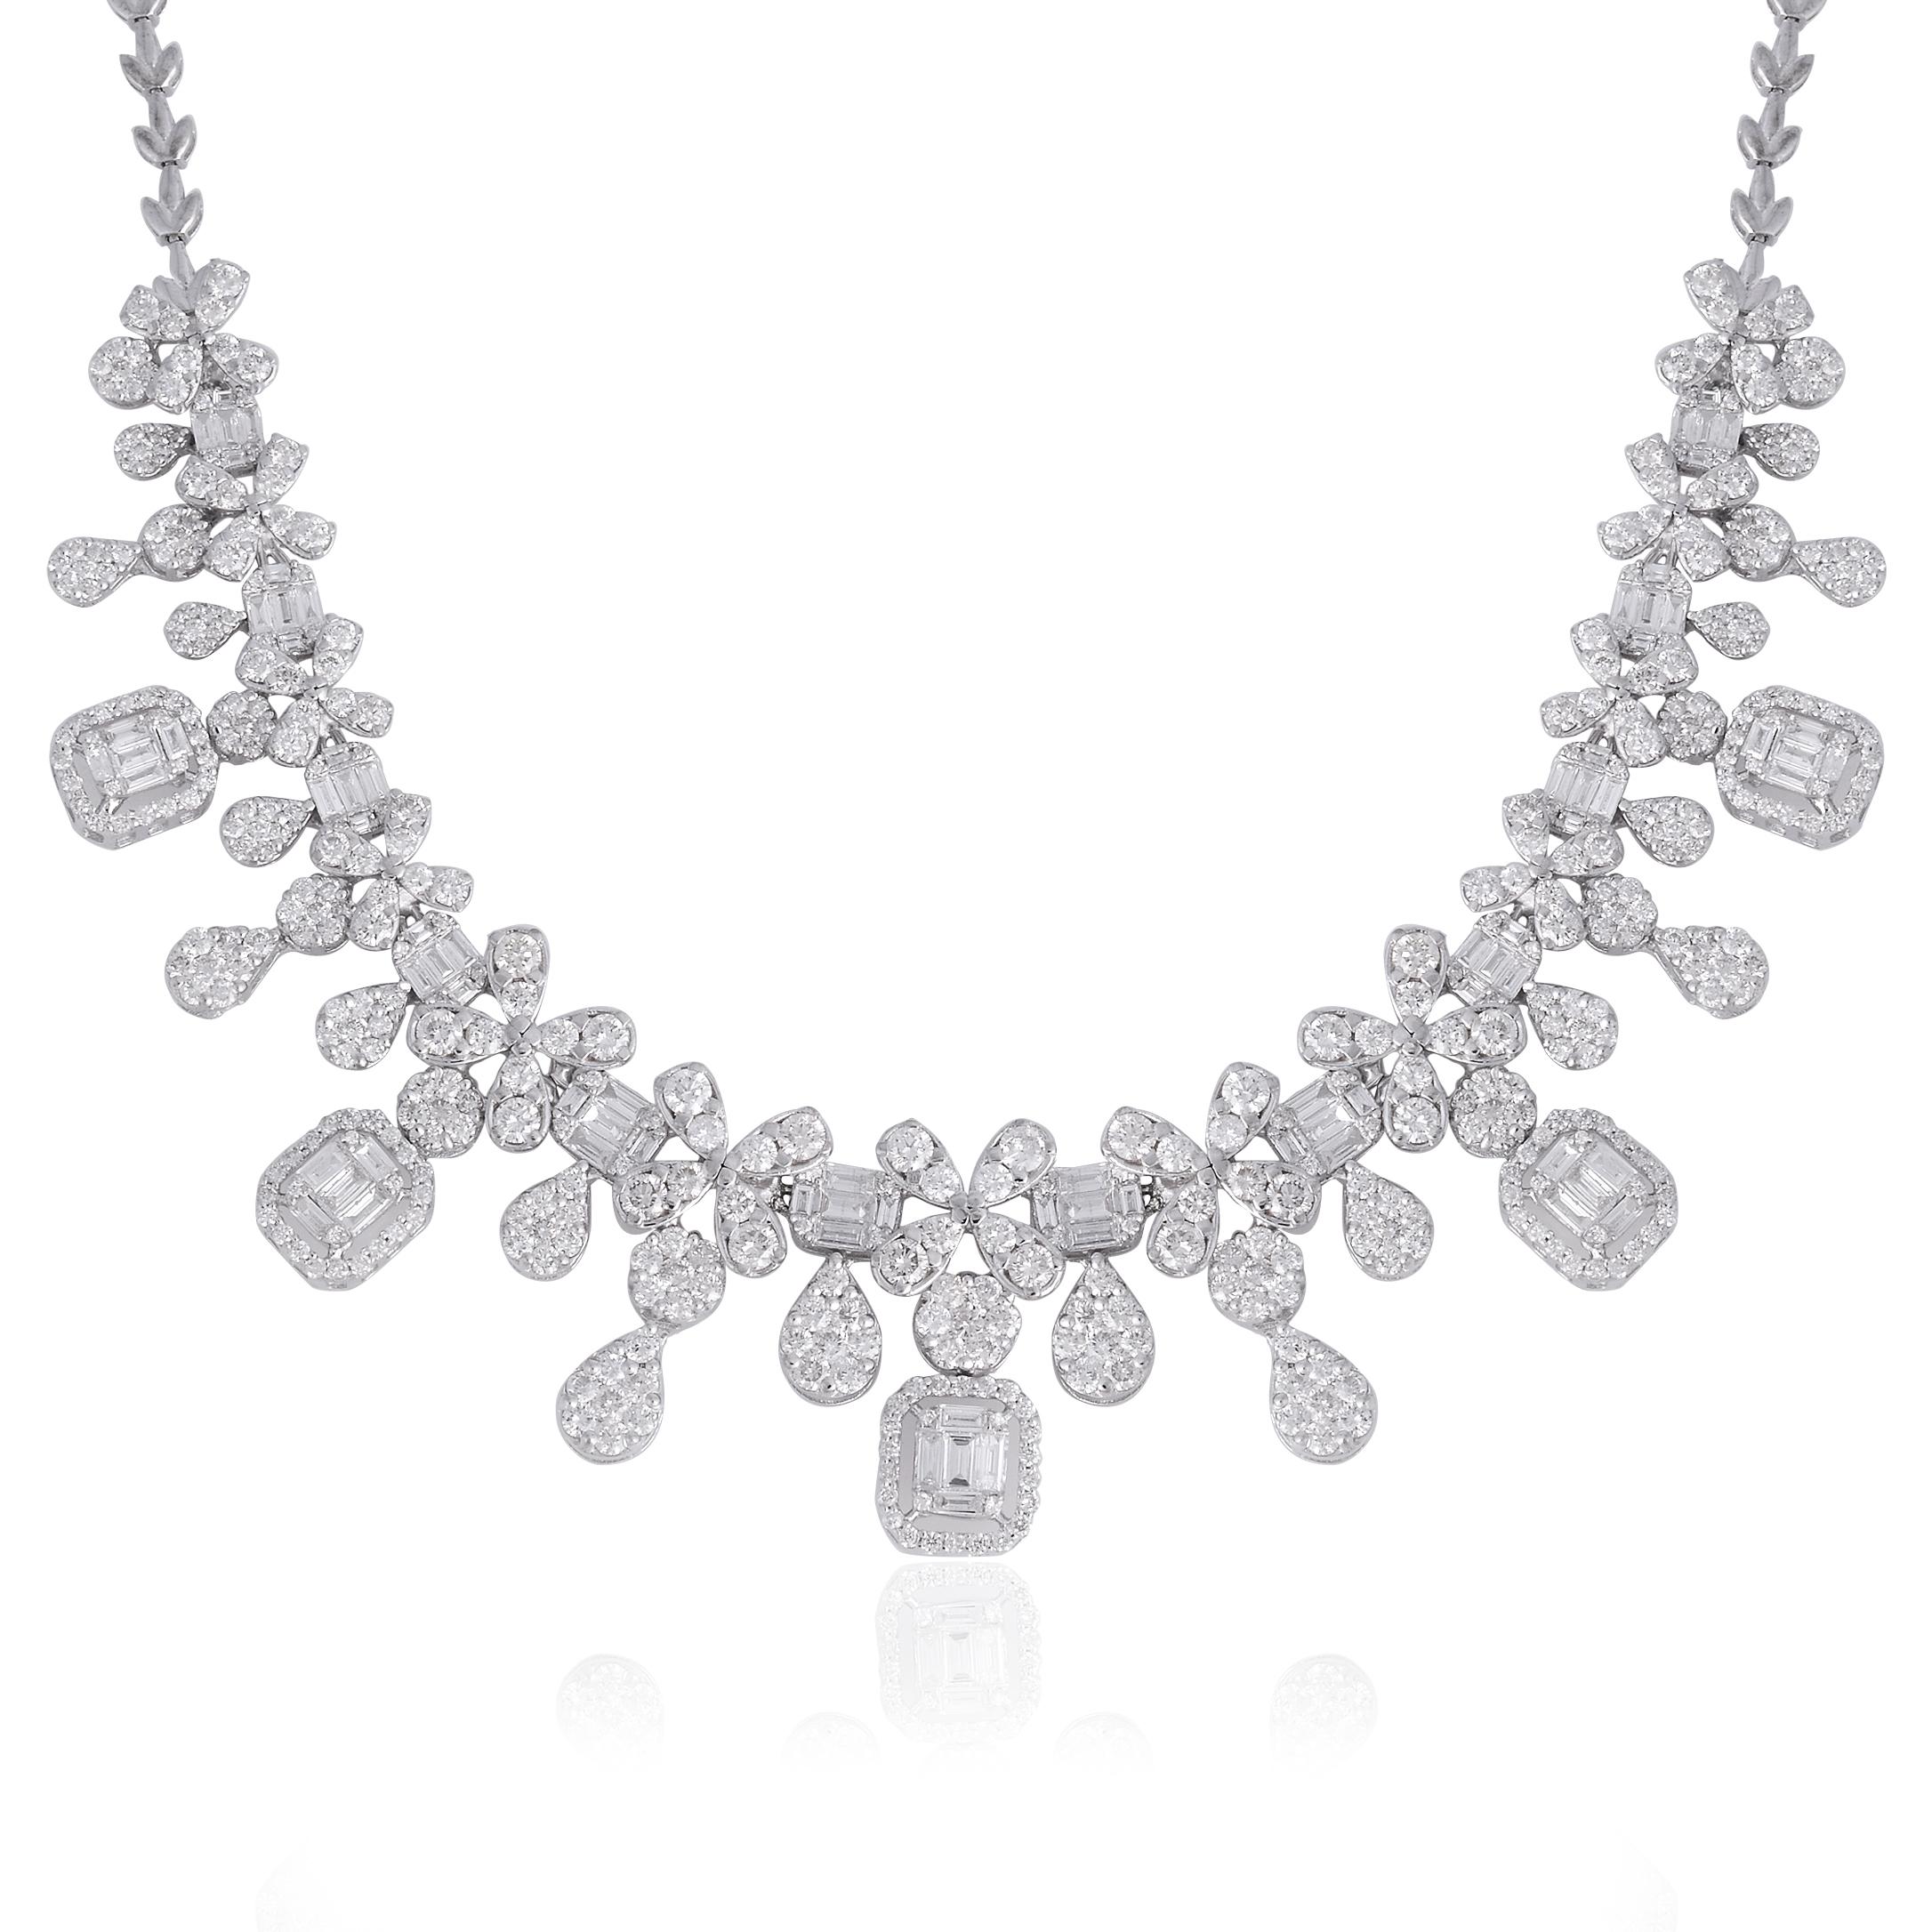 At the heart of this necklace are the baguette and round diamonds, carefully selected for their SI clarity and HI color. The baguette diamonds, with their sleek and elongated shape, add a touch of modernity and refinement to the design.

Item Code